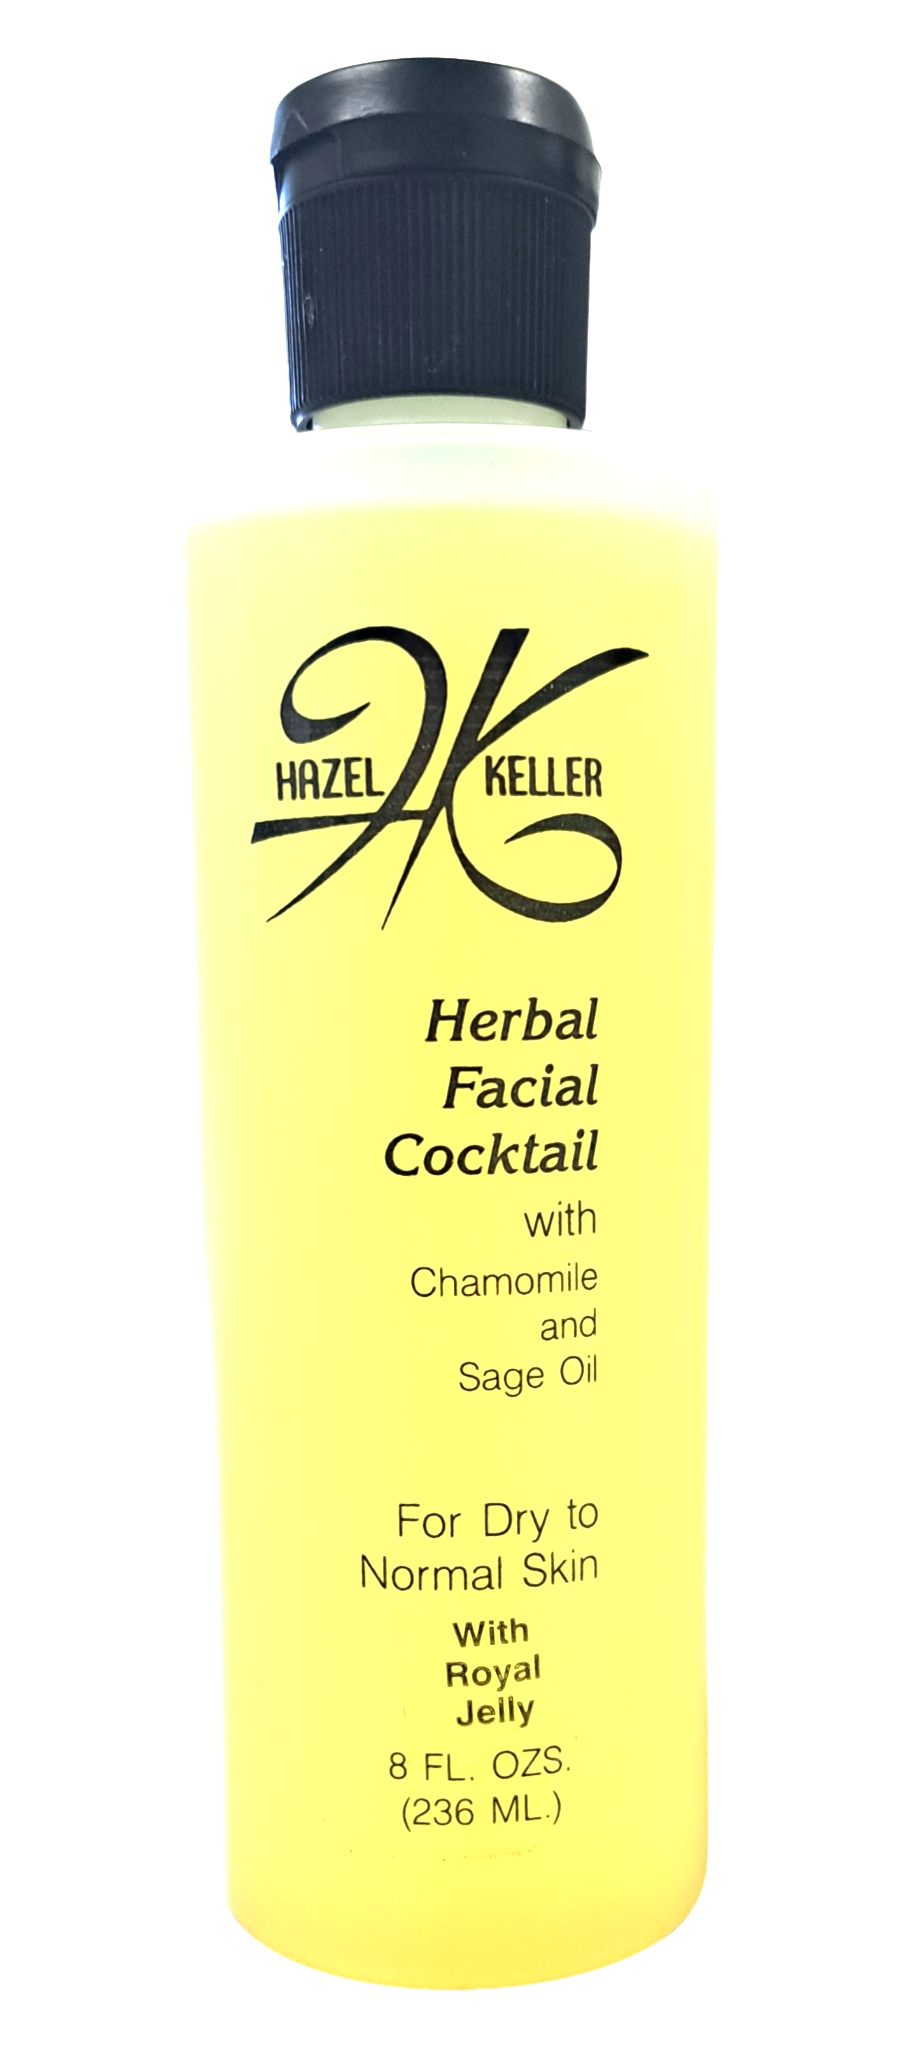 Facial Cocktail with Royal Jelly